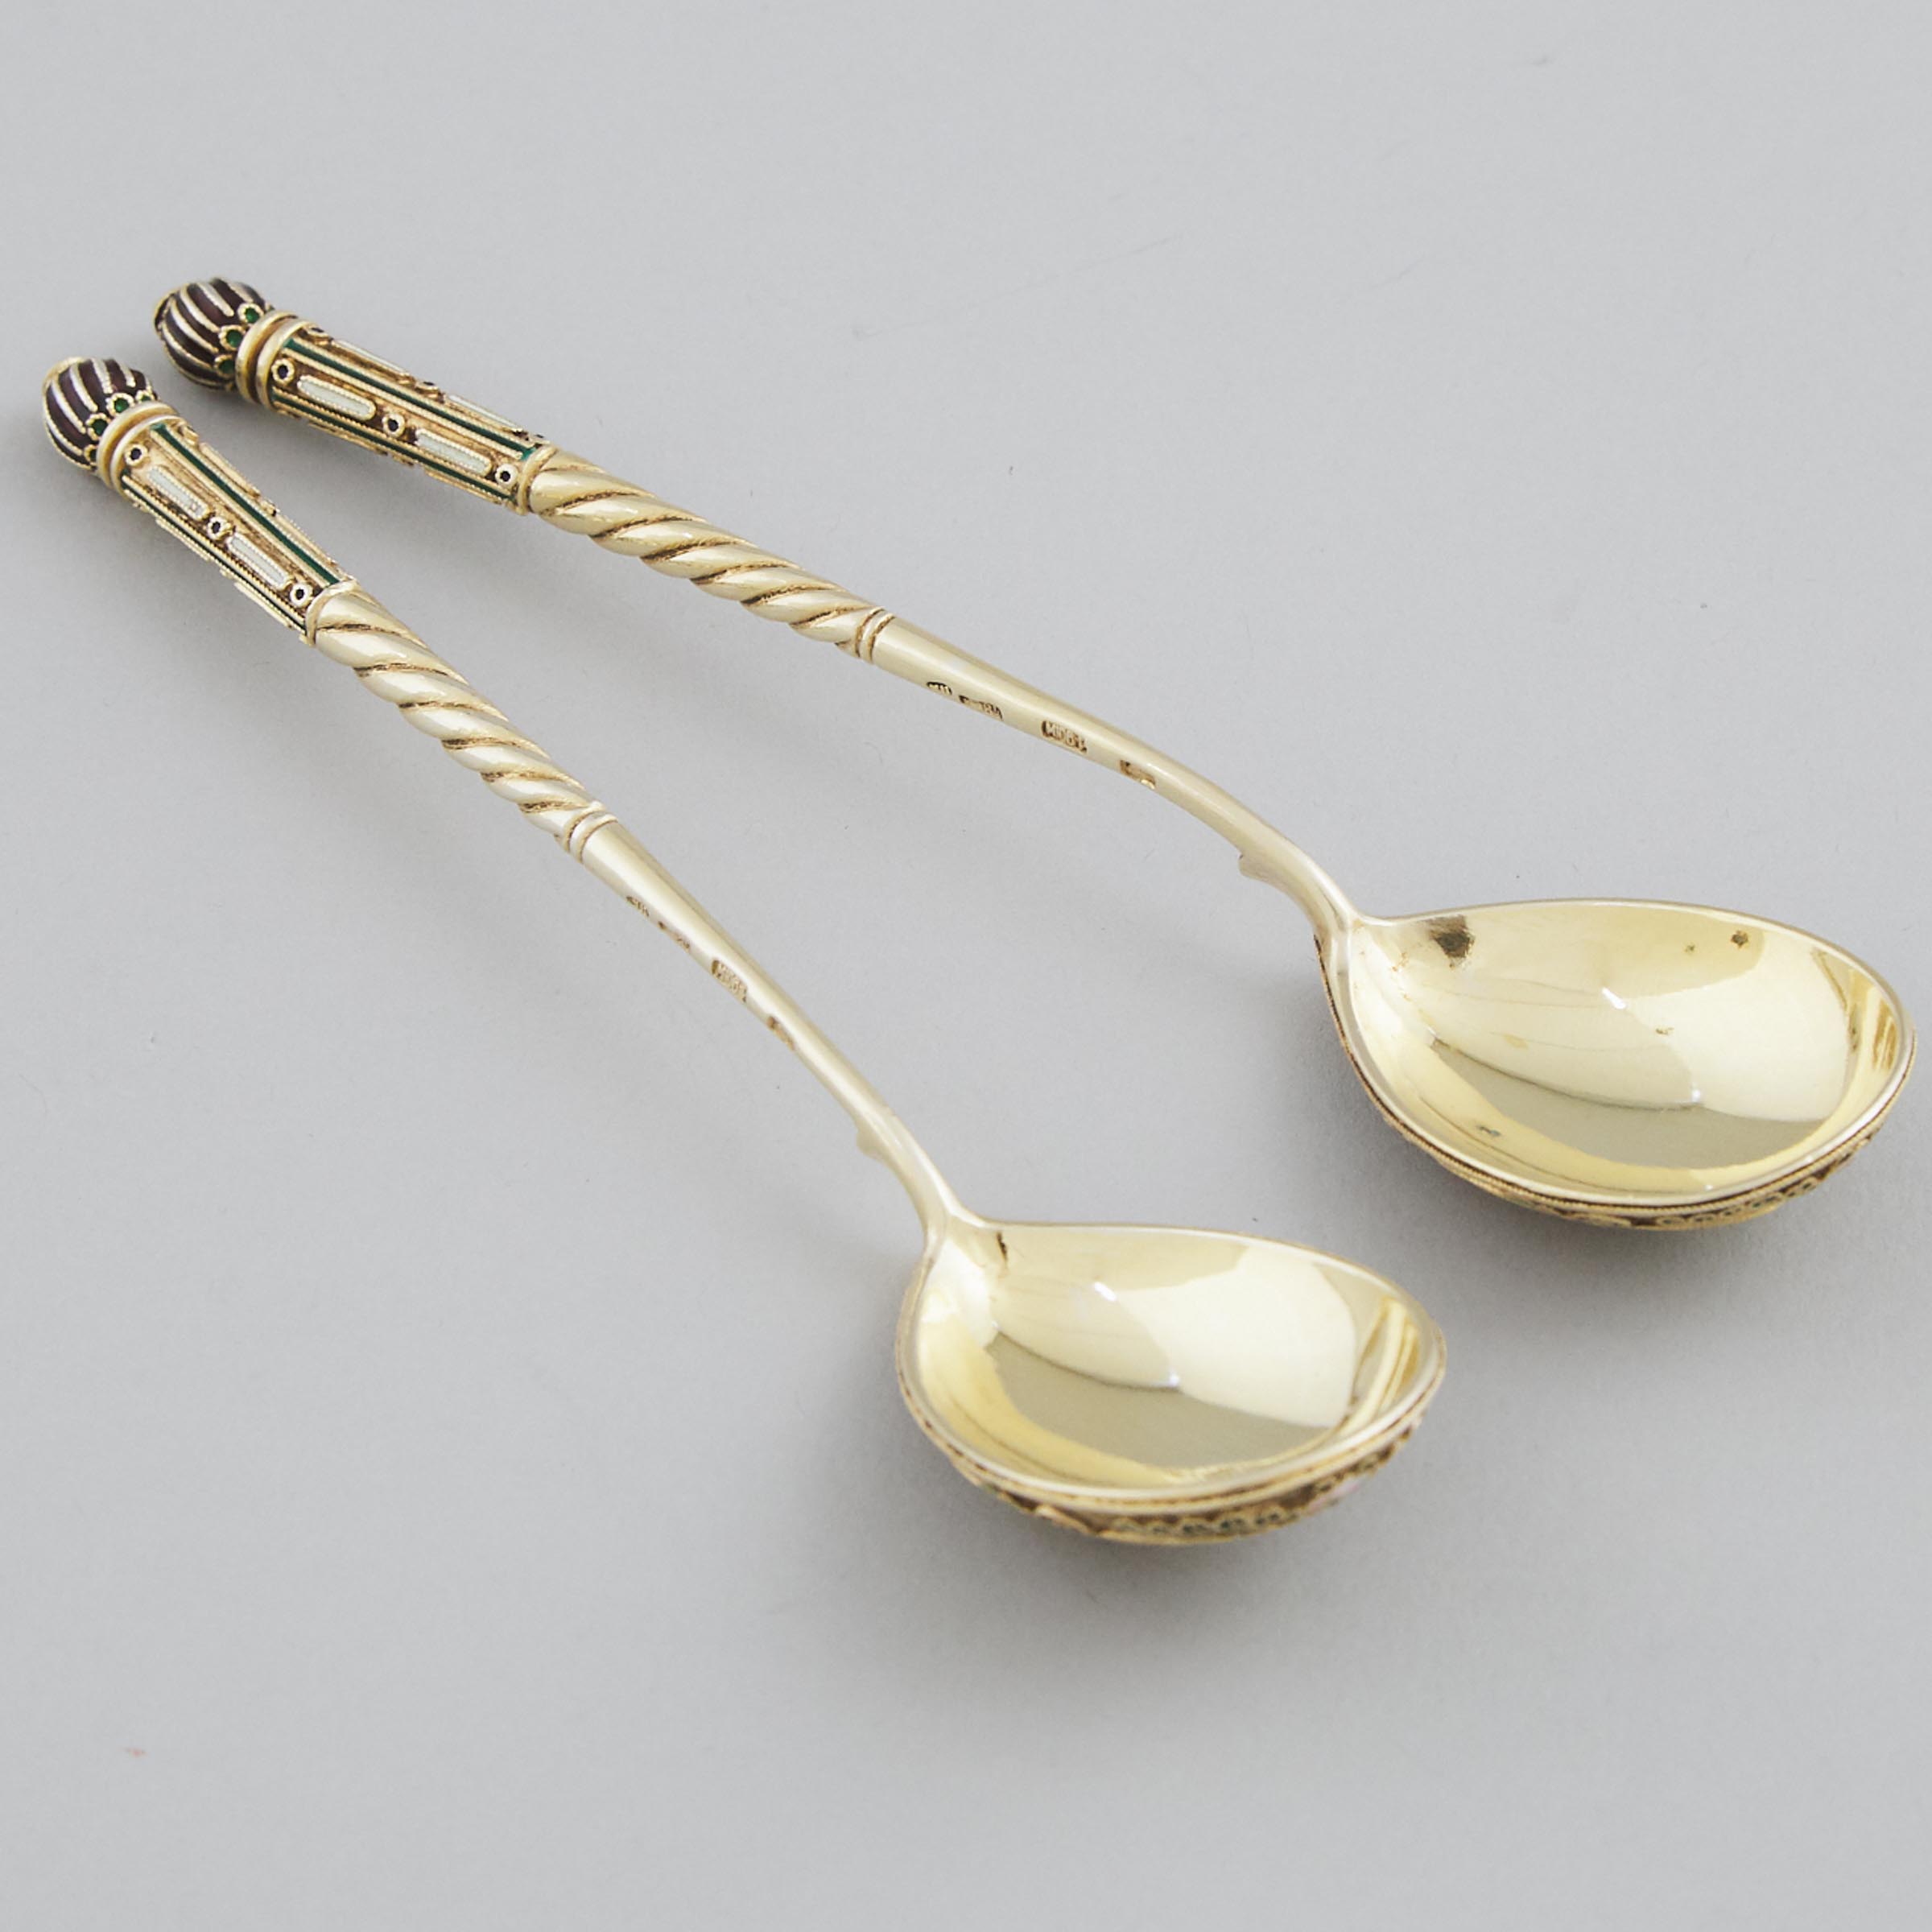 Pair of Russian Silver-Gilt and Cloisonné Enamel Spoons, 11th Artel, Moscow, 1908-17